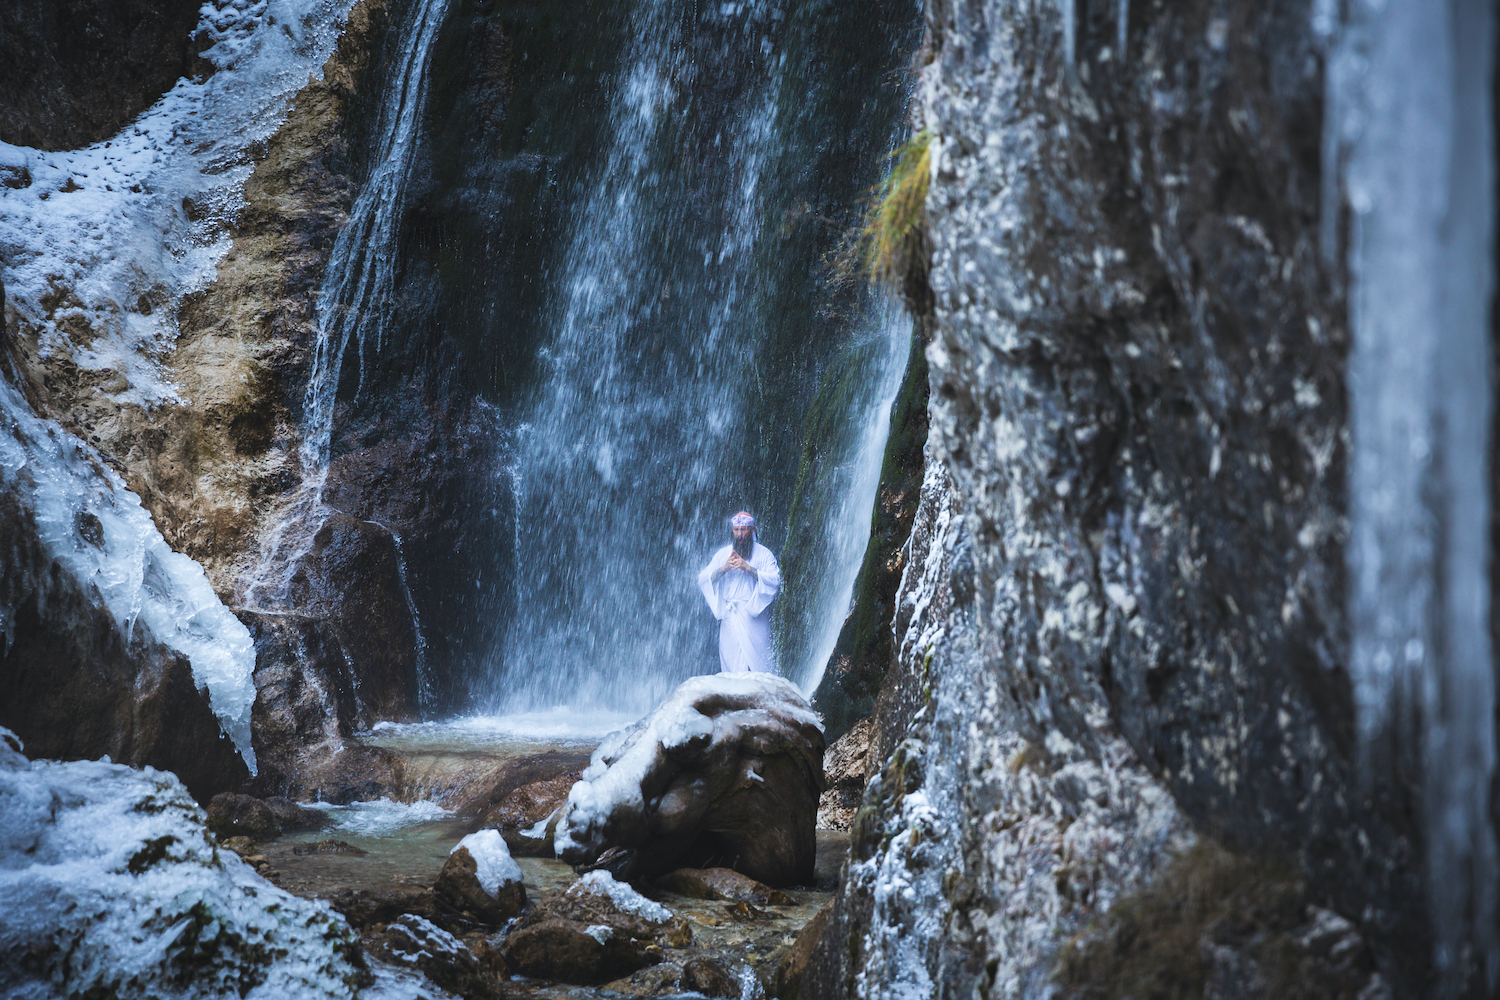 Man in traditional Japanese Shugendo outfit doing waterfall meditation in winter with ice and snow